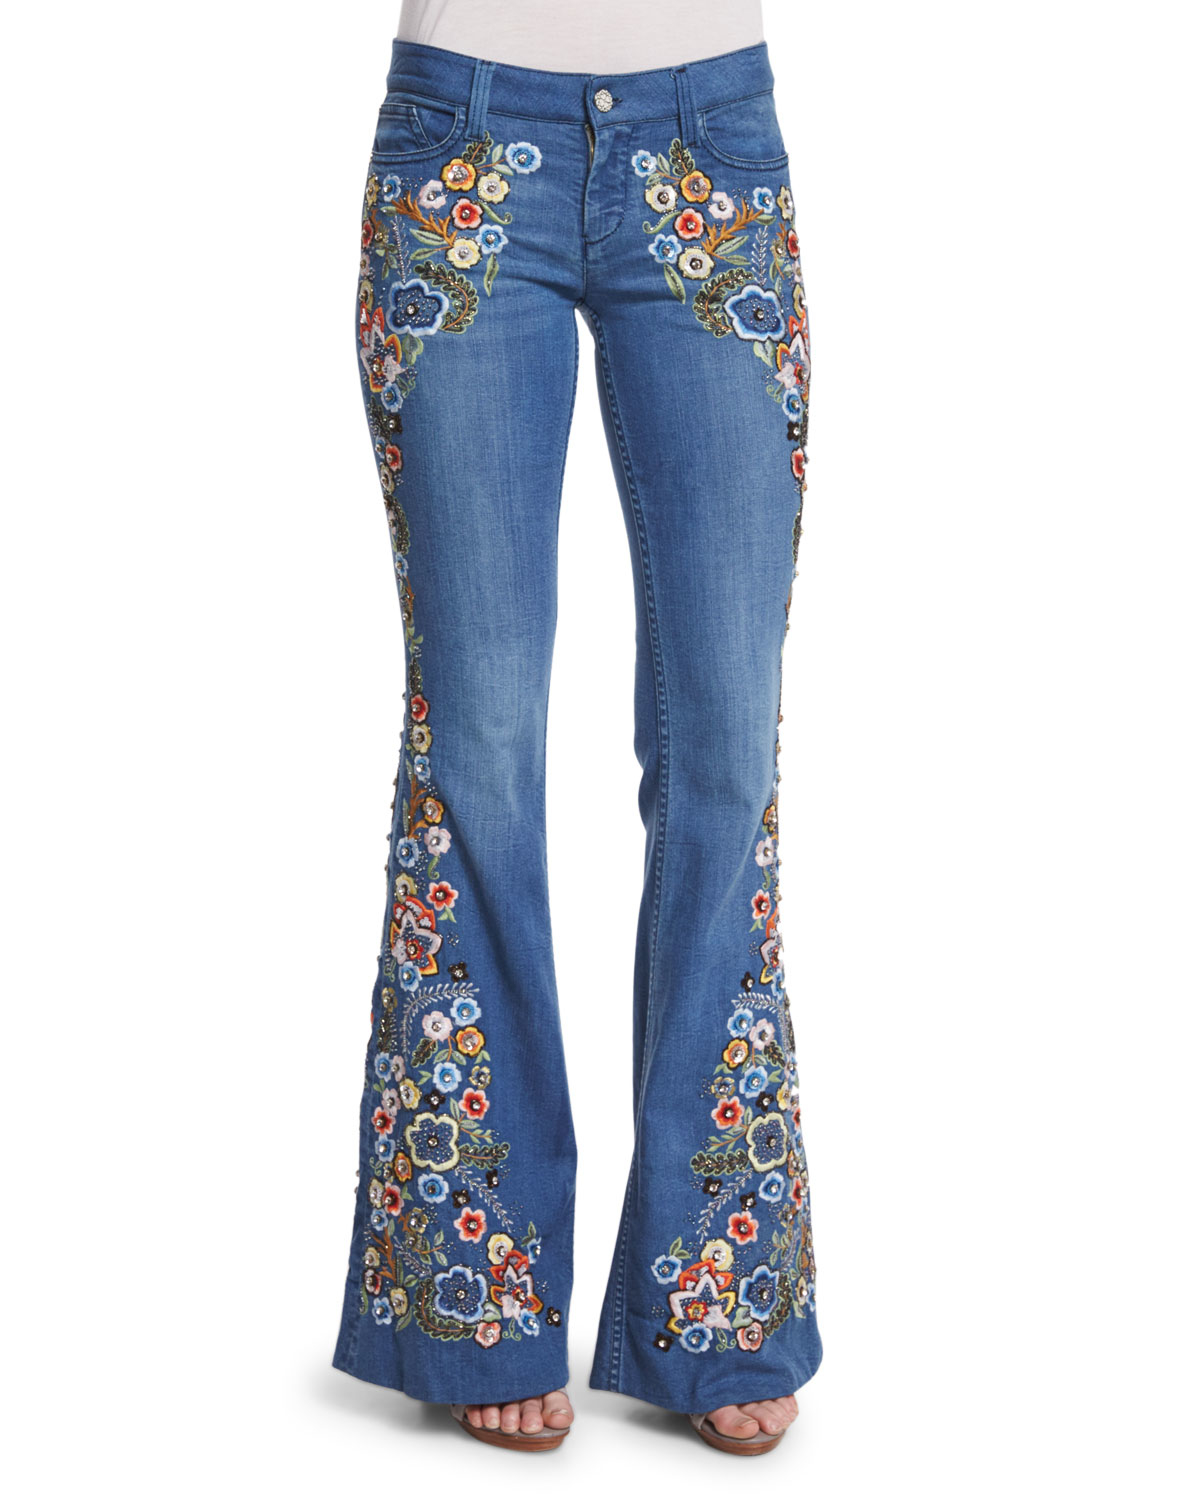 Alice + olivia Ryley Embroidered Flare Jeans in Blue | Lyst